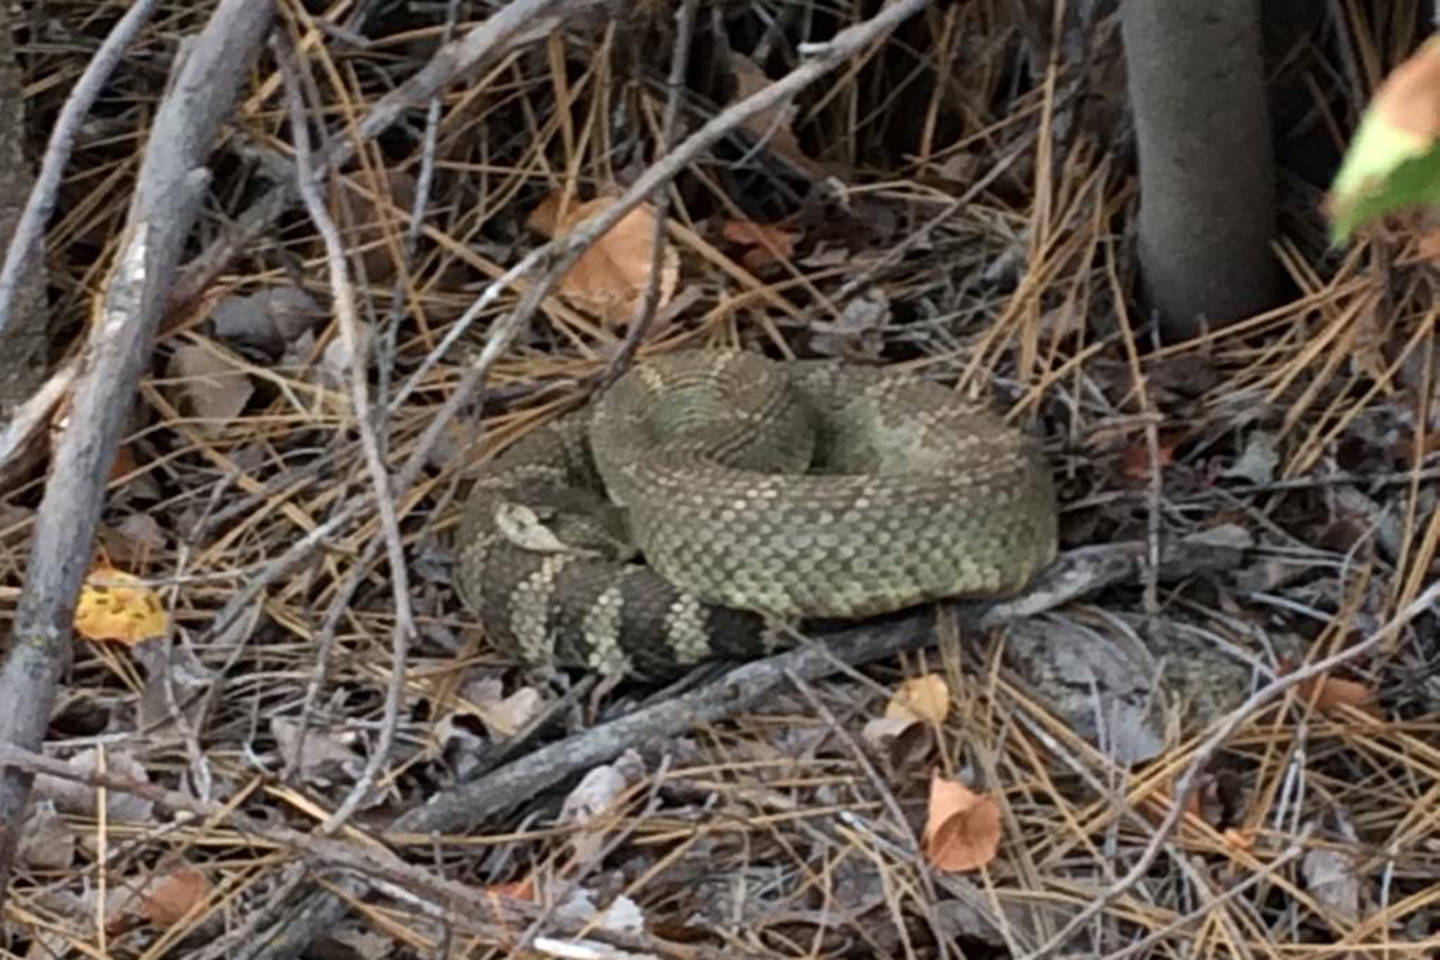 A picture of a Western Rattlesnake taken by a BC Wildfire crew member working the Snowy Mountain fire, (BC Wildfire)